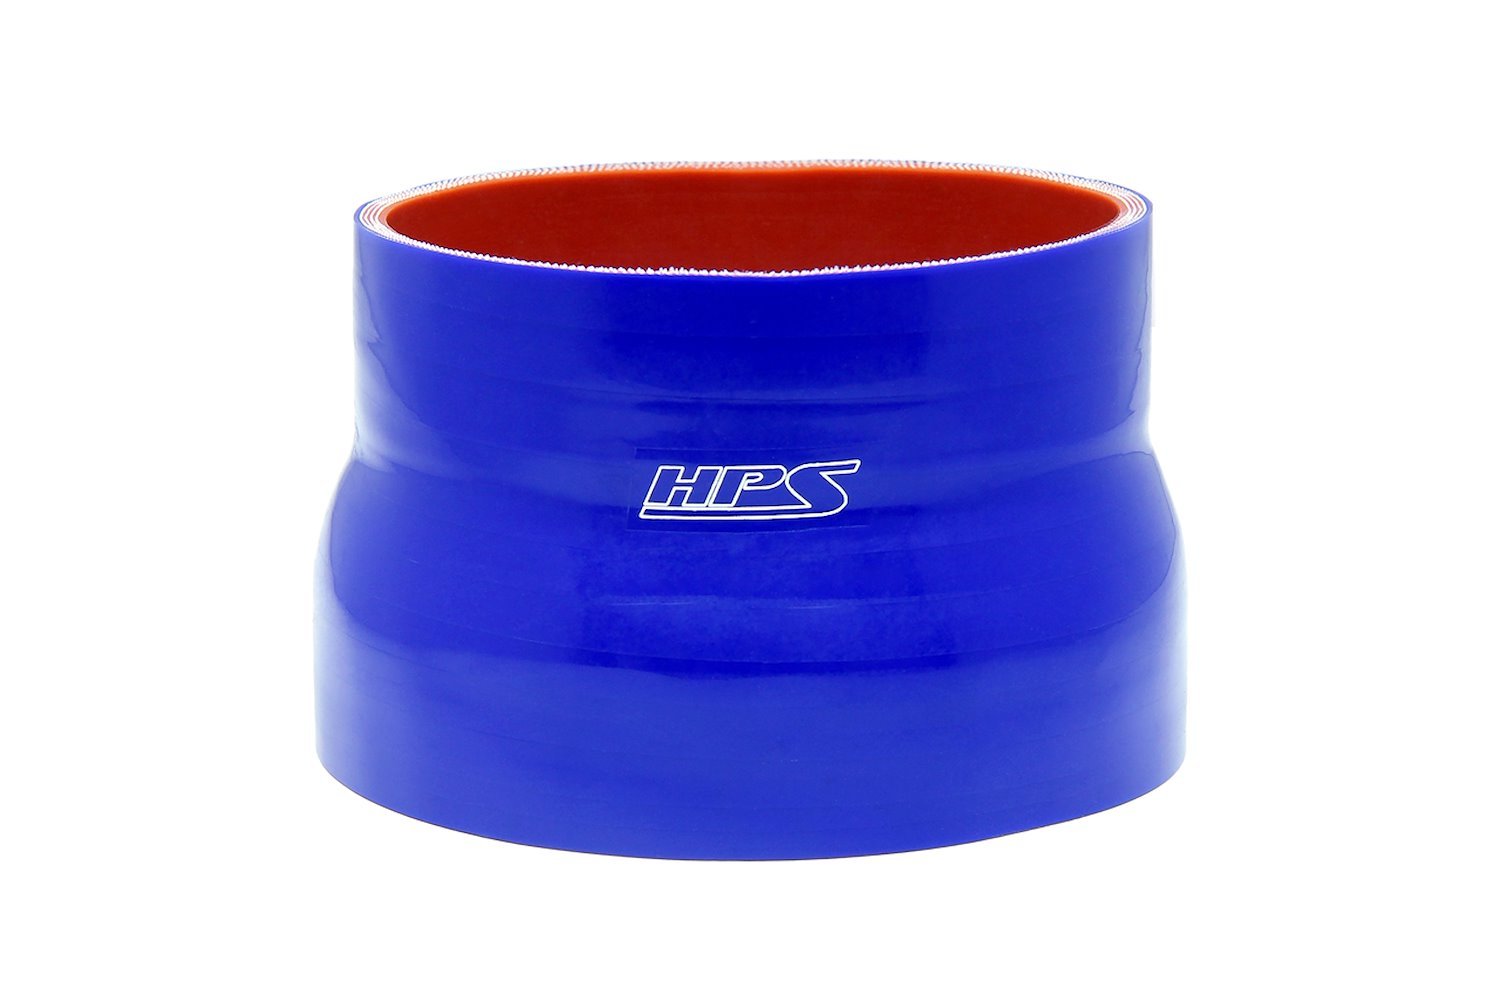 HTSR-350-400-L4-BLUE Silicone Reducer Hose, High-Temp 4-Ply Reinforced, 3-1/2 in. - 4 in. ID, 4 in. Long, Blue